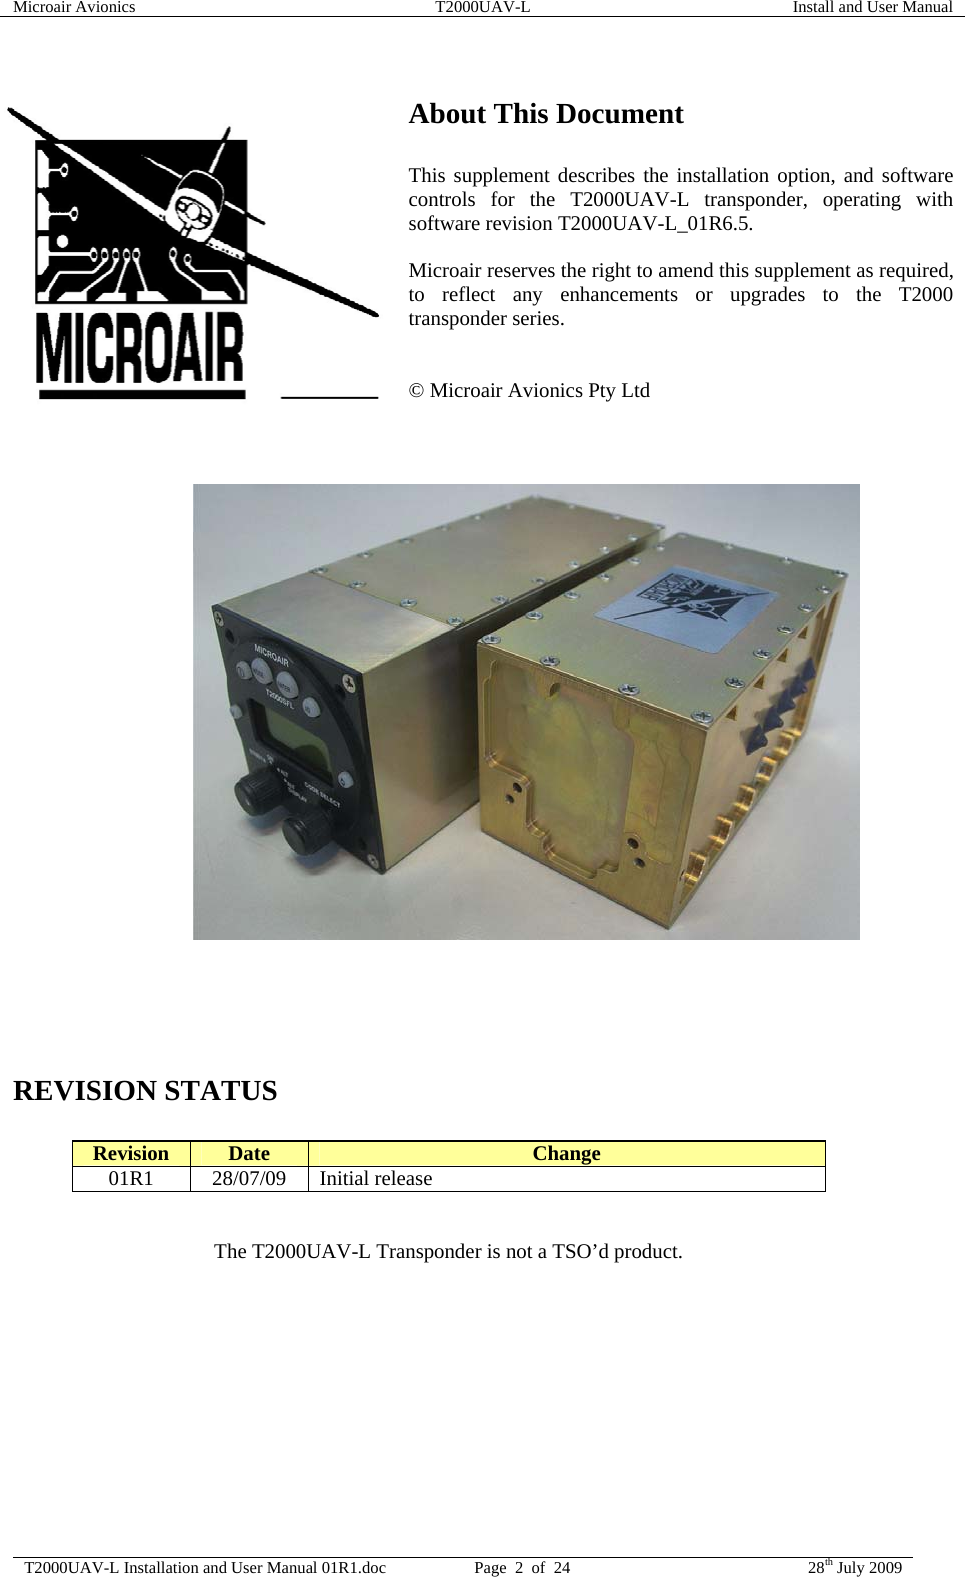 Microair Avionics  T2000UAV-L  Install and User Manual  T2000UAV-L Installation and User Manual 01R1.doc  Page  2  of  24  28th July 2009   About This Document  This supplement describes the installation option, and software controls for the T2000UAV-L transponder, operating with software revision T2000UAV-L_01R6.5.  Microair reserves the right to amend this supplement as required, to reflect any enhancements or upgrades to the T2000 transponder series.   © Microair Avionics Pty Ltd                             REVISION STATUS  Revision  Date  Change 01R1 28/07/09 Initial release   The T2000UAV-L Transponder is not a TSO’d product.  